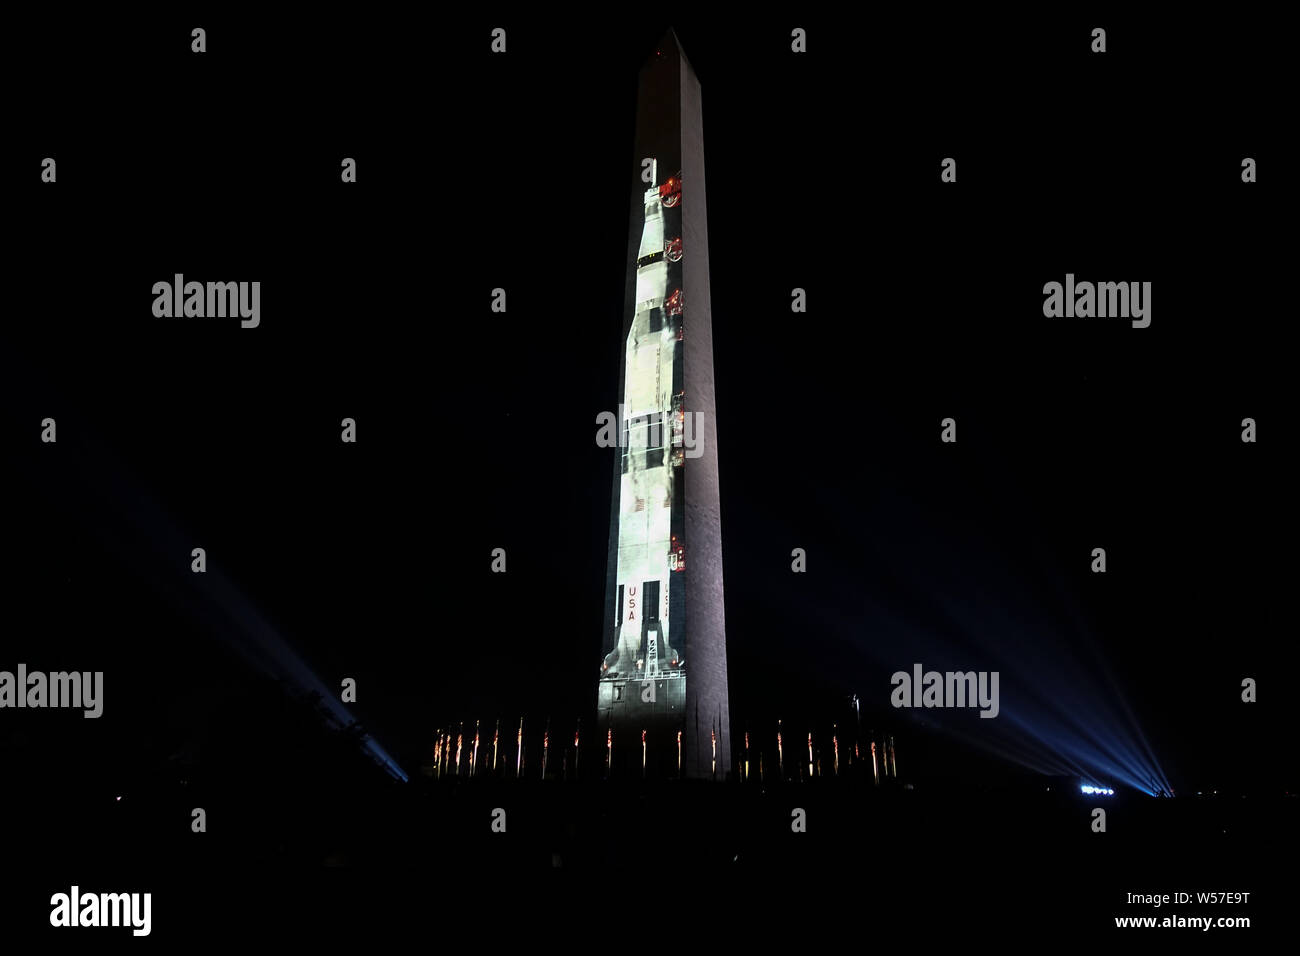 Washington, DC - July 18, 2019. Celebrating the 50th anniversary of the first lunar landing, an image of the Saturn V rocket at its launch pad is projected onto the Washington Monument, part of a five-day commemorating the Apollo 11 moon landing in 1969. Stock Photo